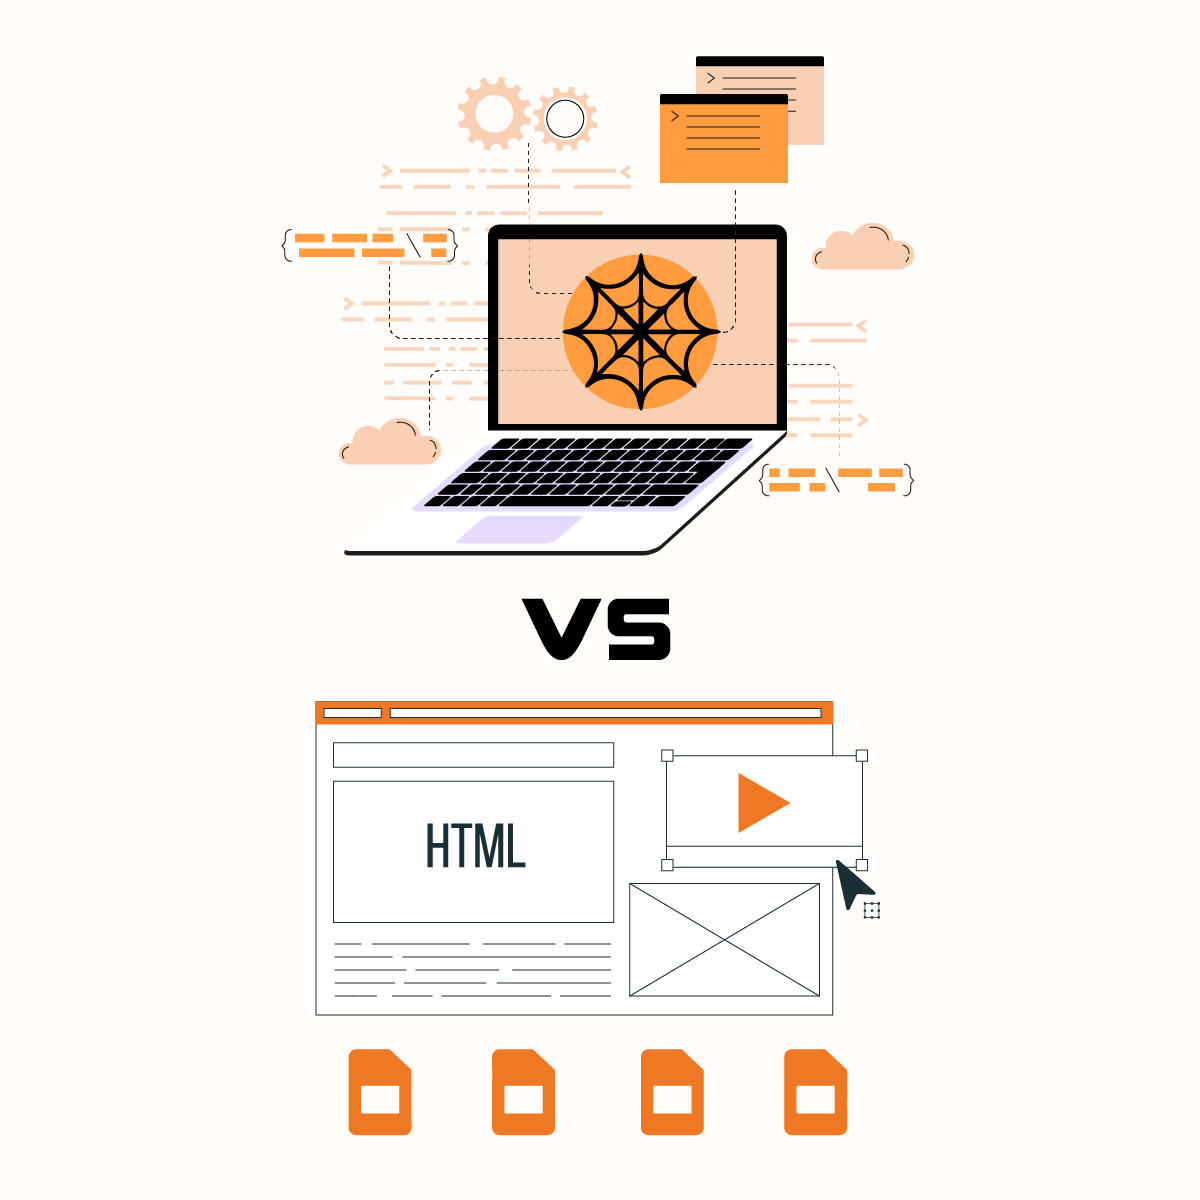 The Difference Between Web Crawling vs Web Scraping